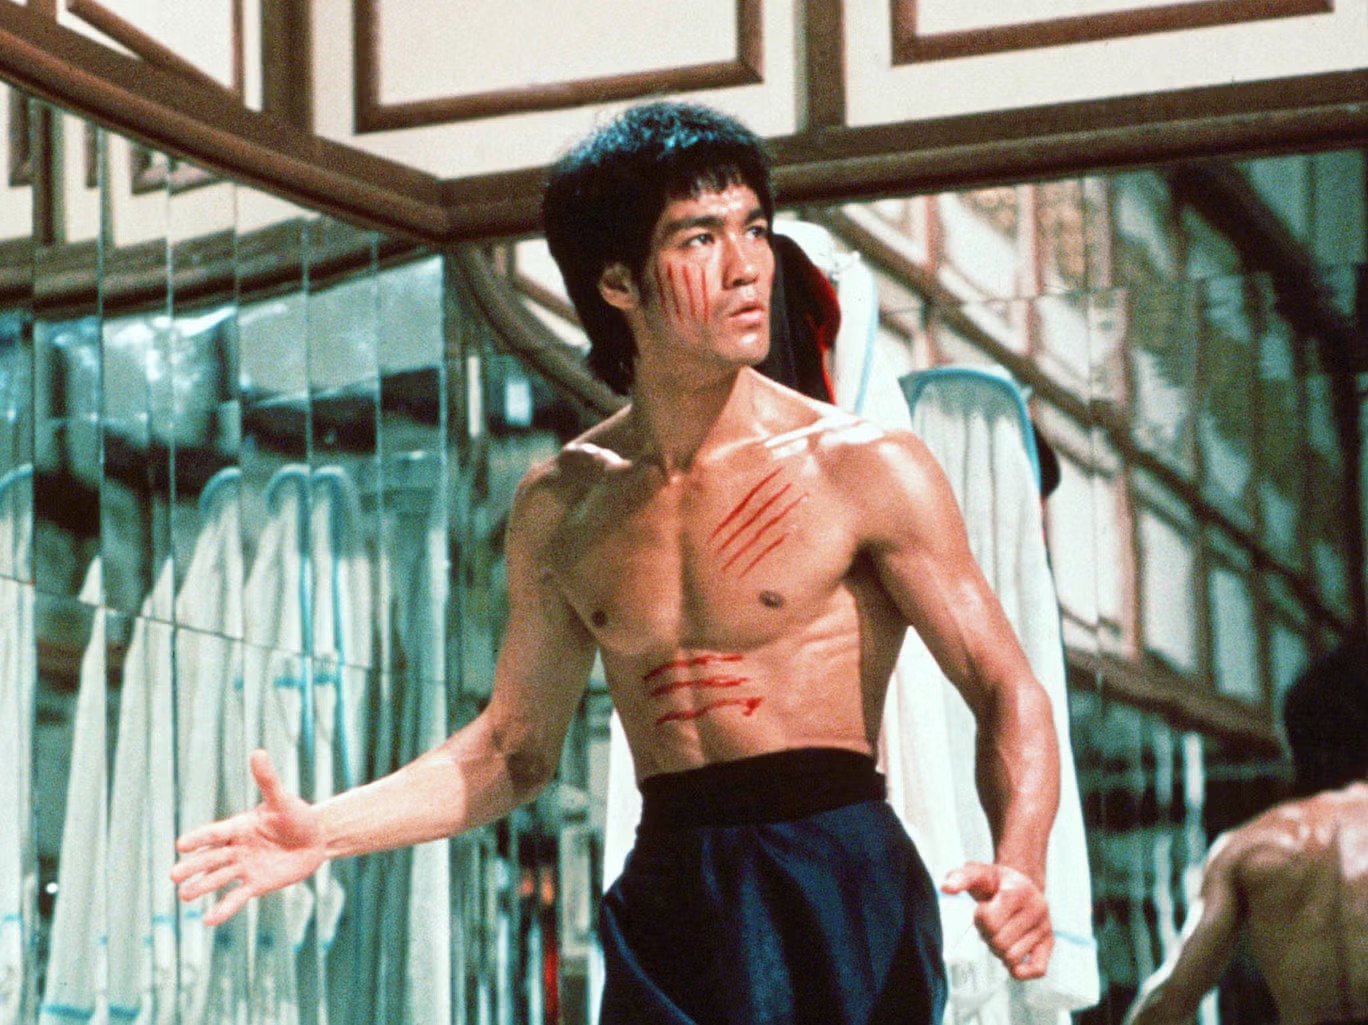 Bruce Lee in a still from “Enter the Dragon”. To commemorate the 50th anniversary of the martial arts icon’s death, Hong Kong actor and avid fan Stephen Au will show the “only copy” of lost Lee movie footage to an audience in Vancouver’s Chinatown.